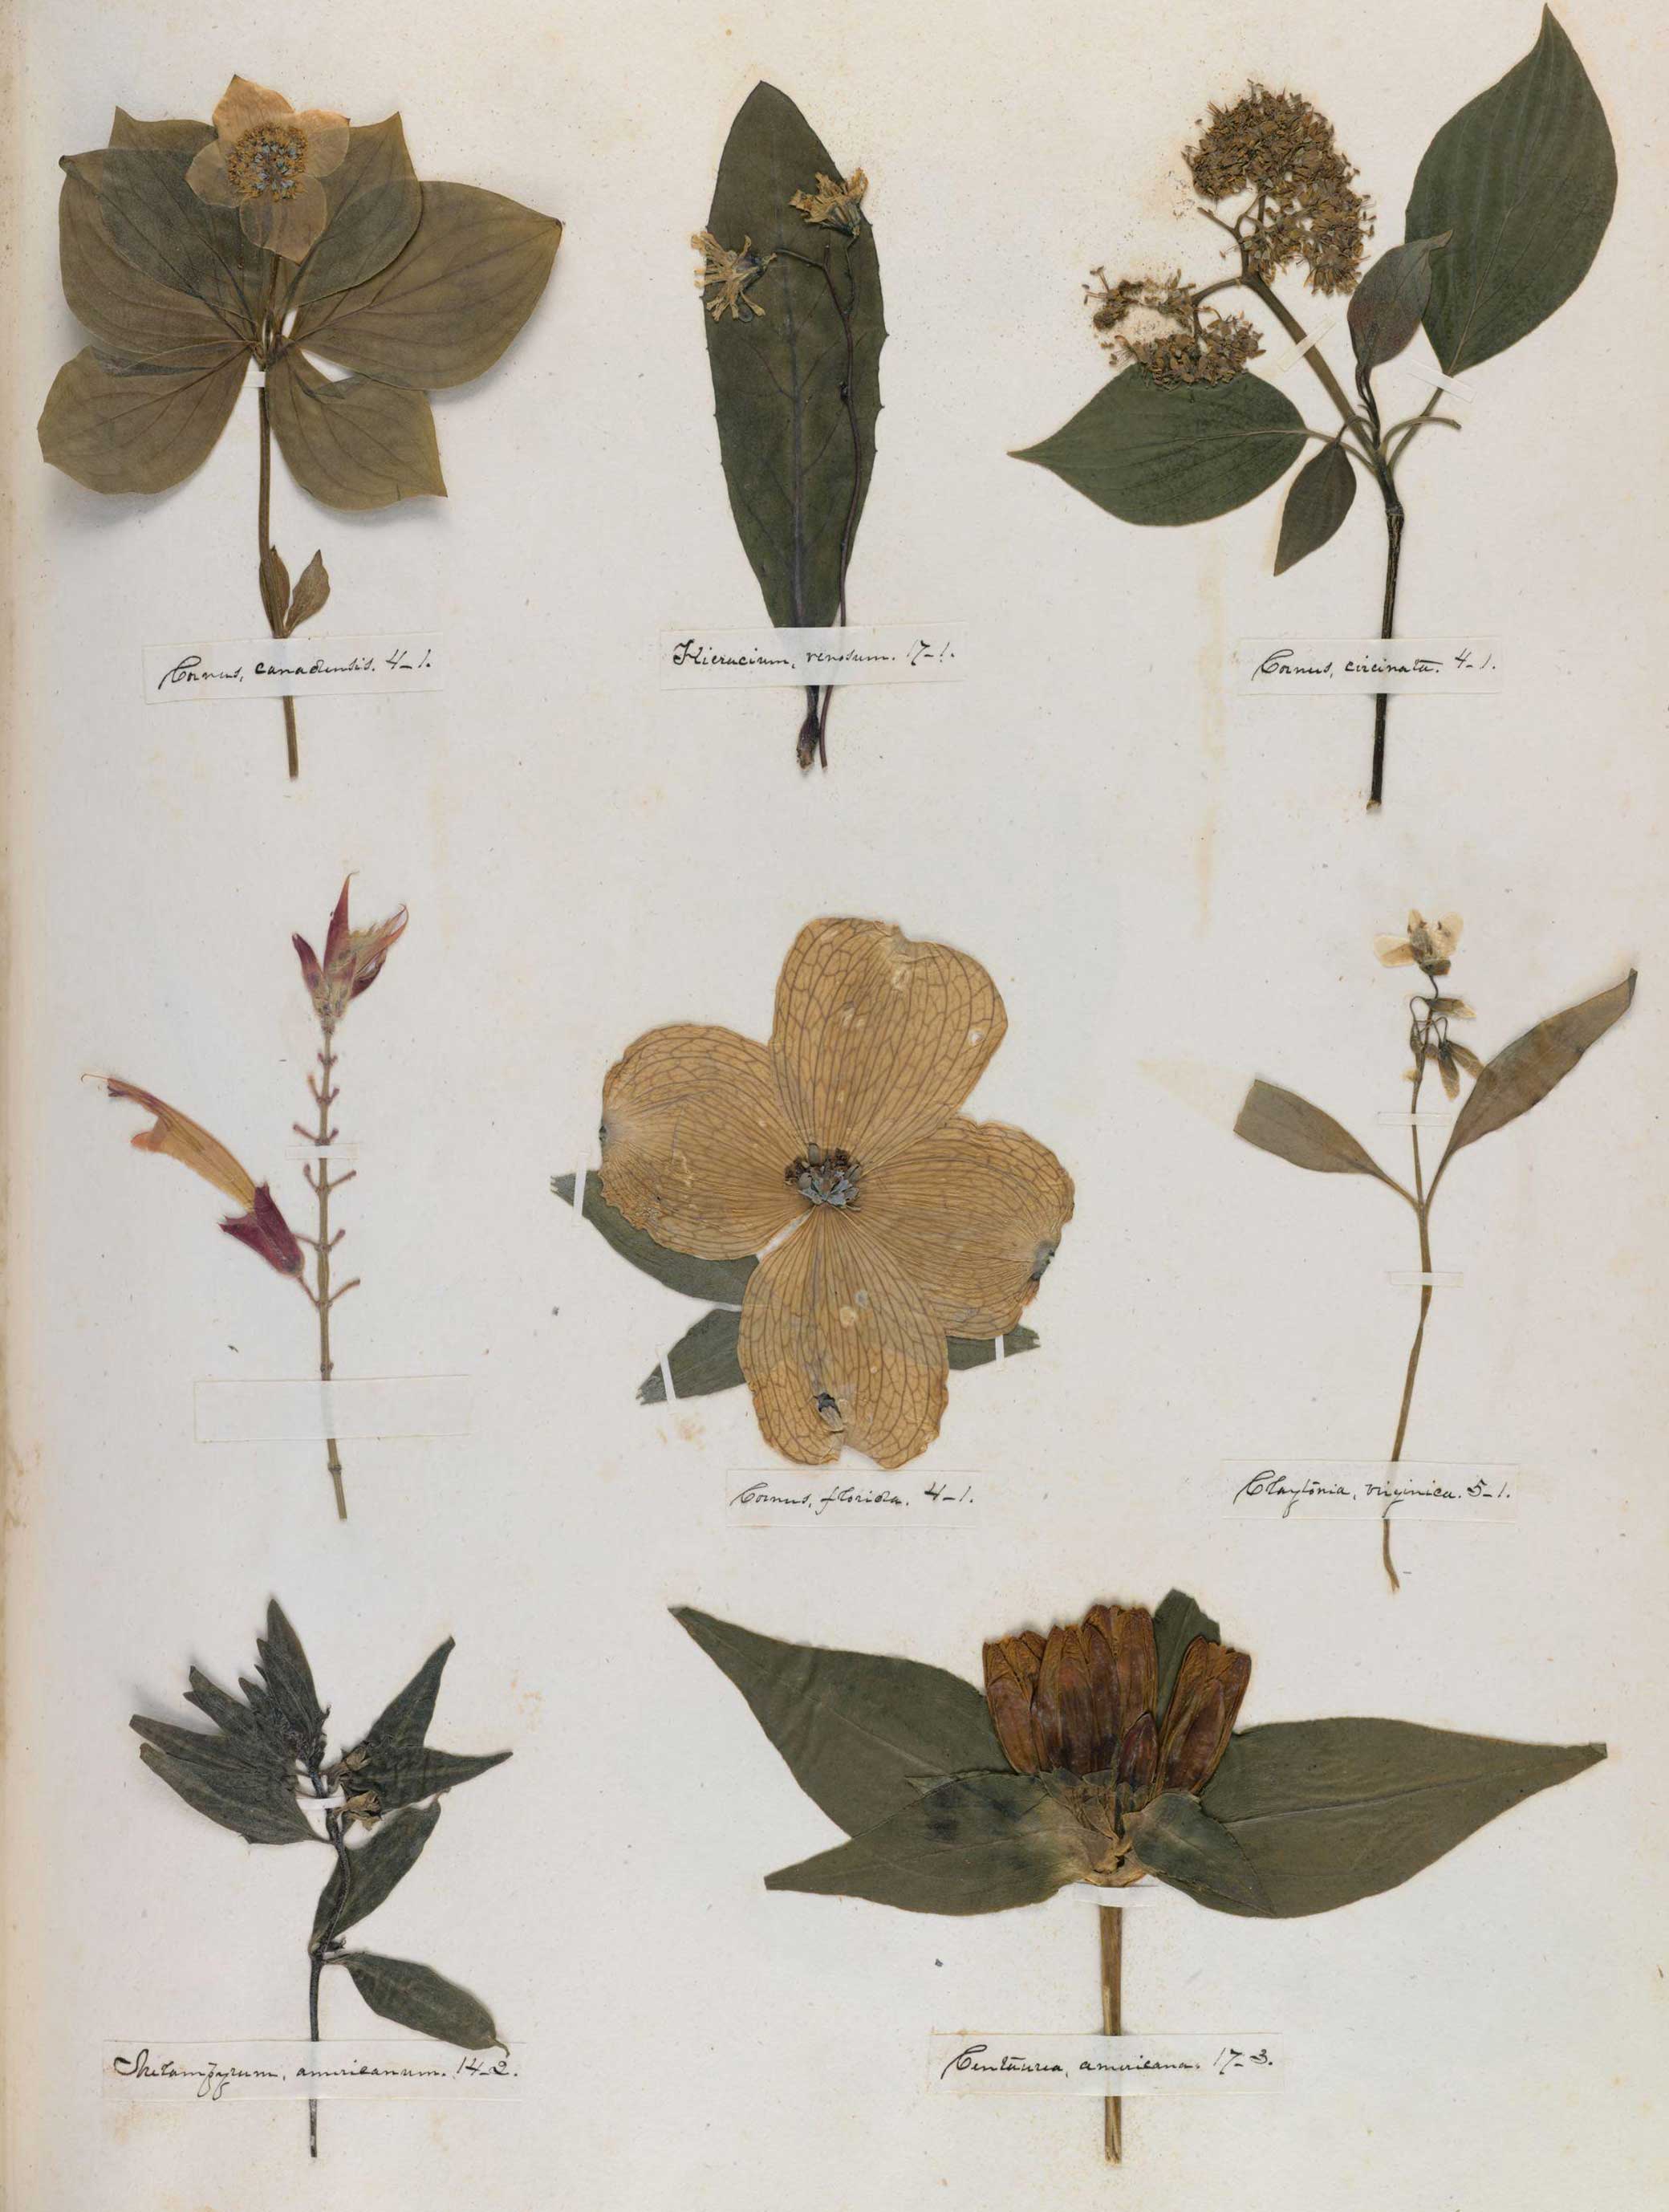 Pressed leaves on a page with labels